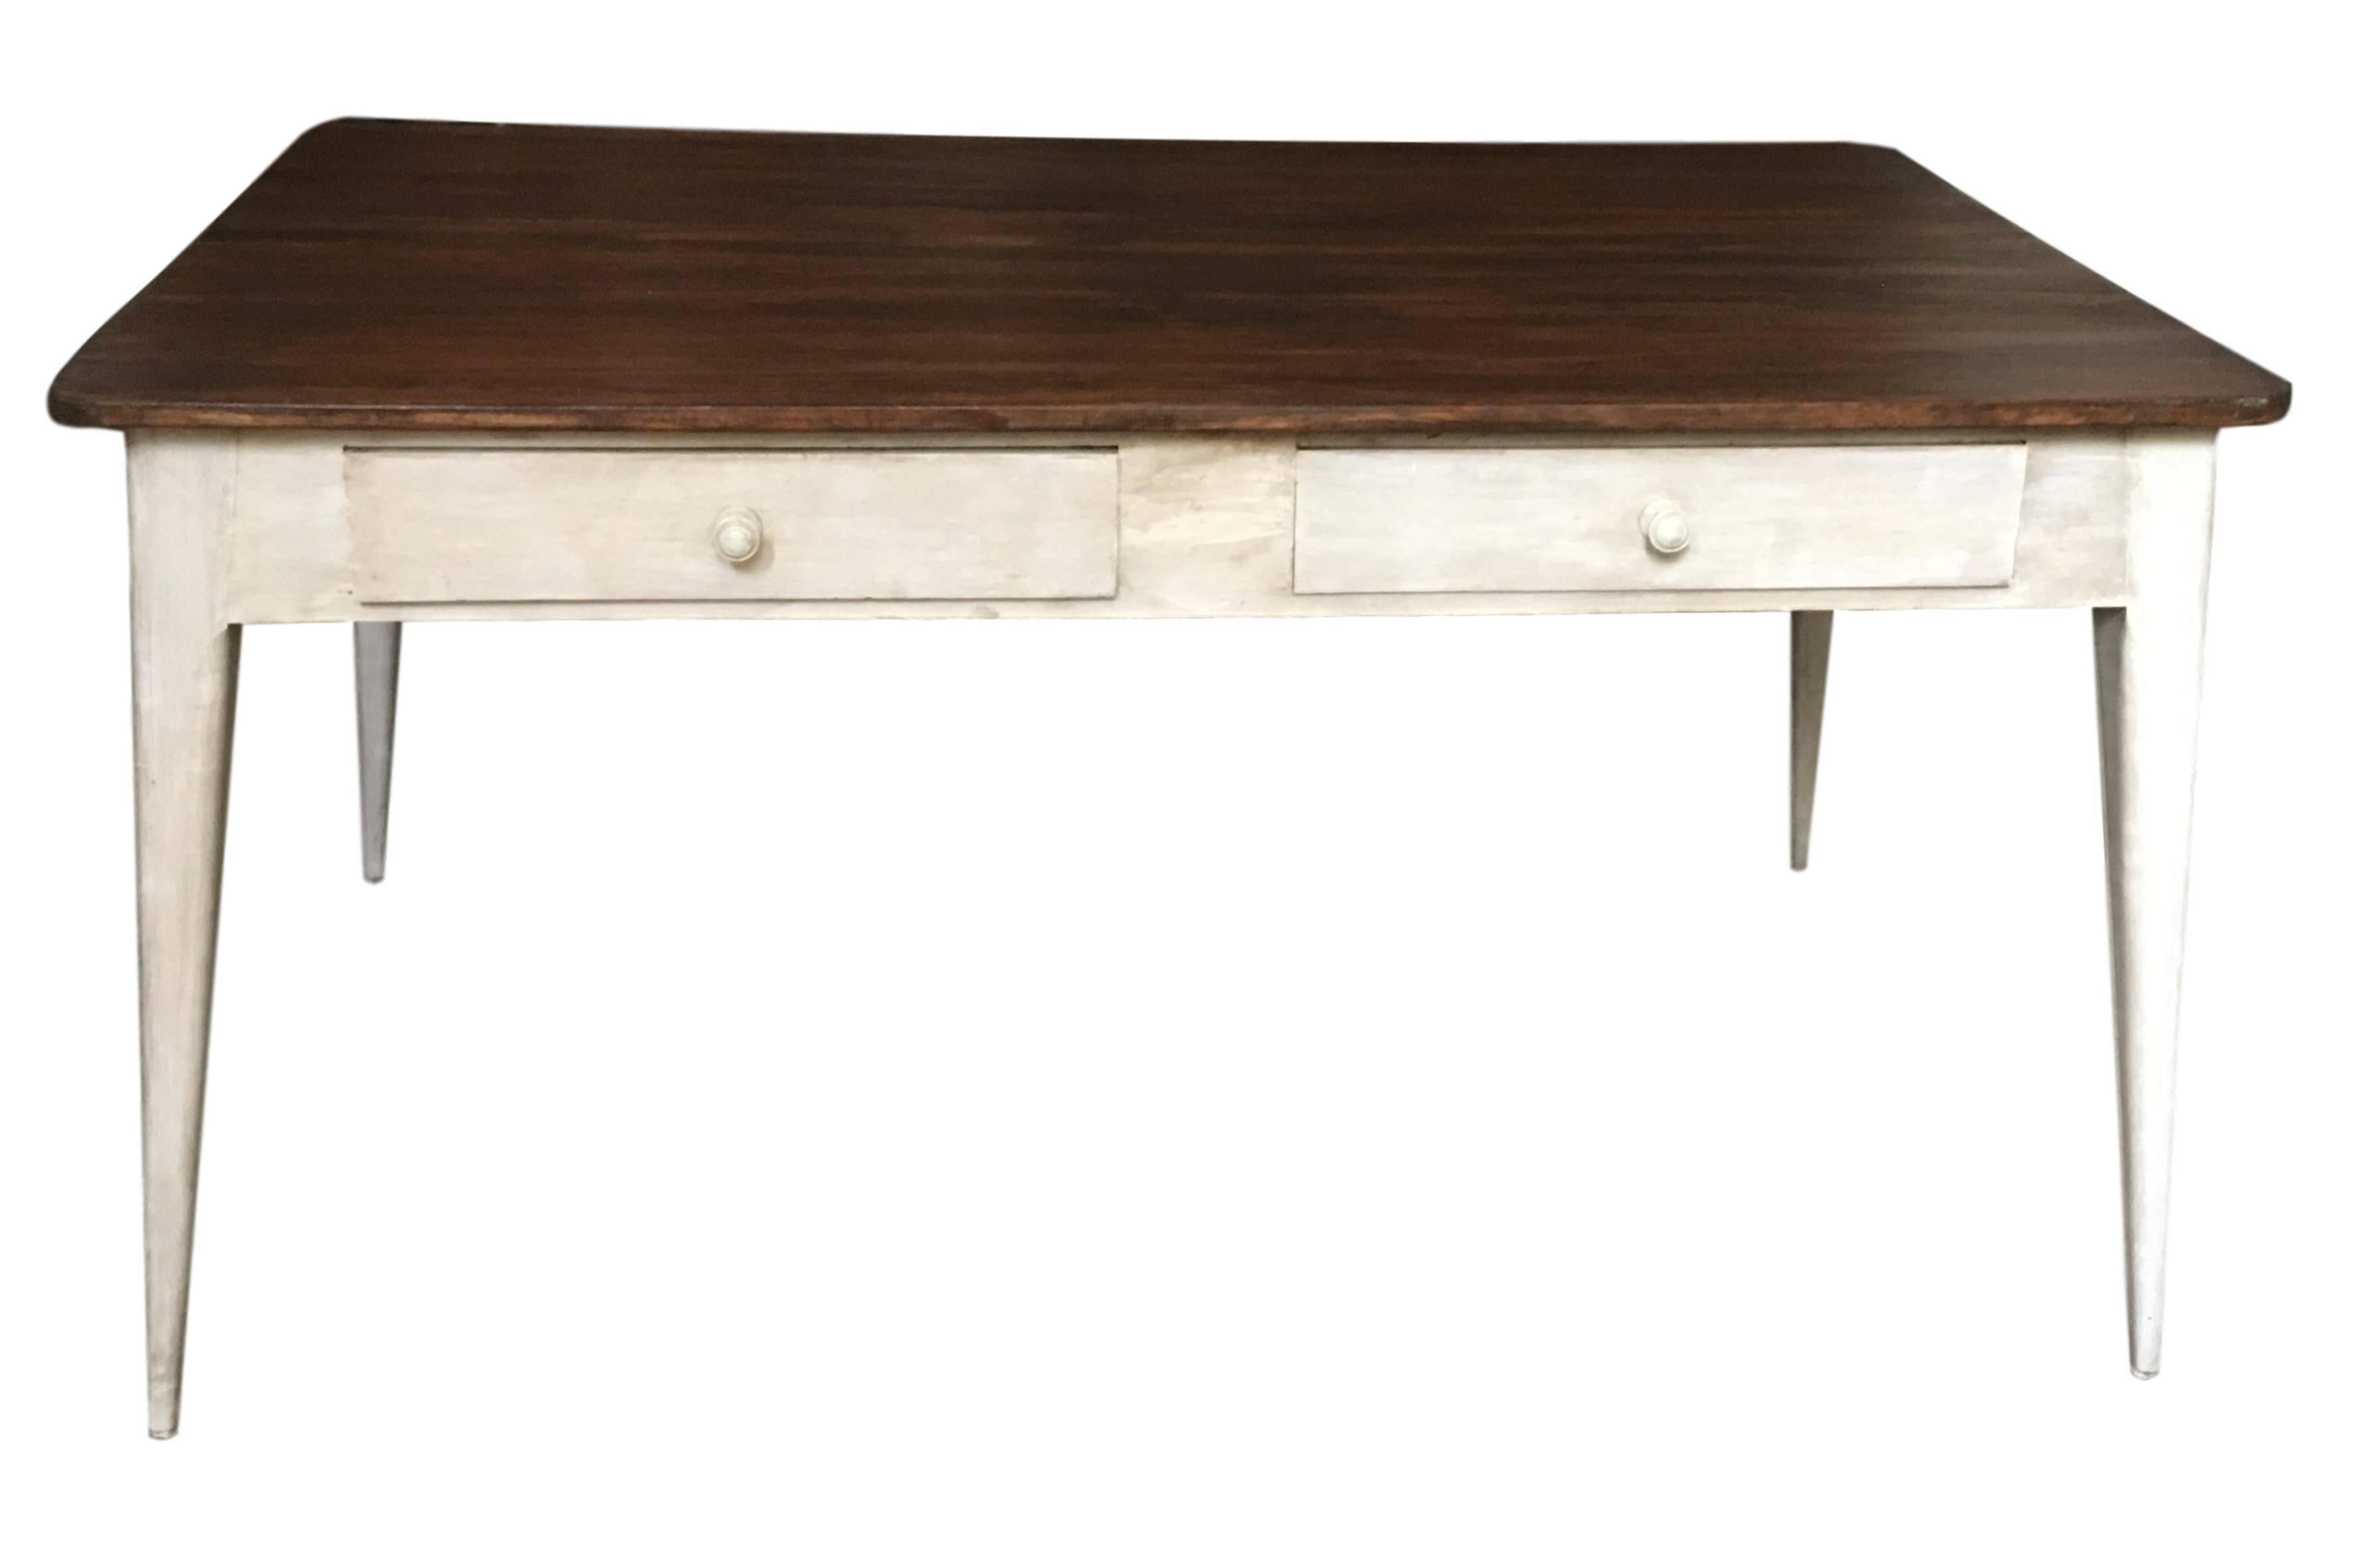 French Provincial Dining Table or Partners Desk with Four Drawers in Antique White Patina, France